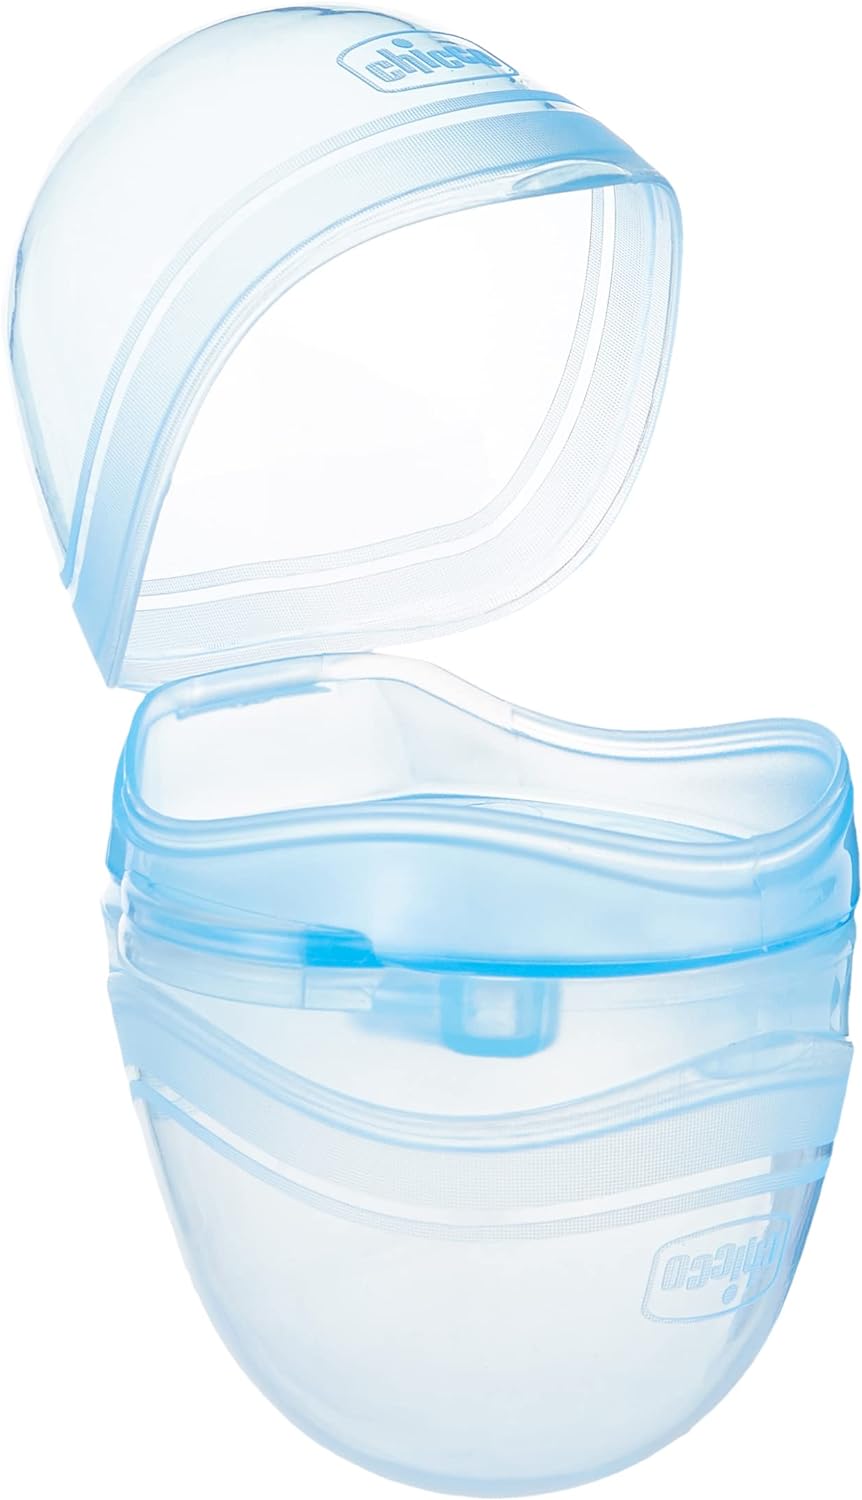 Double Soother Holder by Chicco.